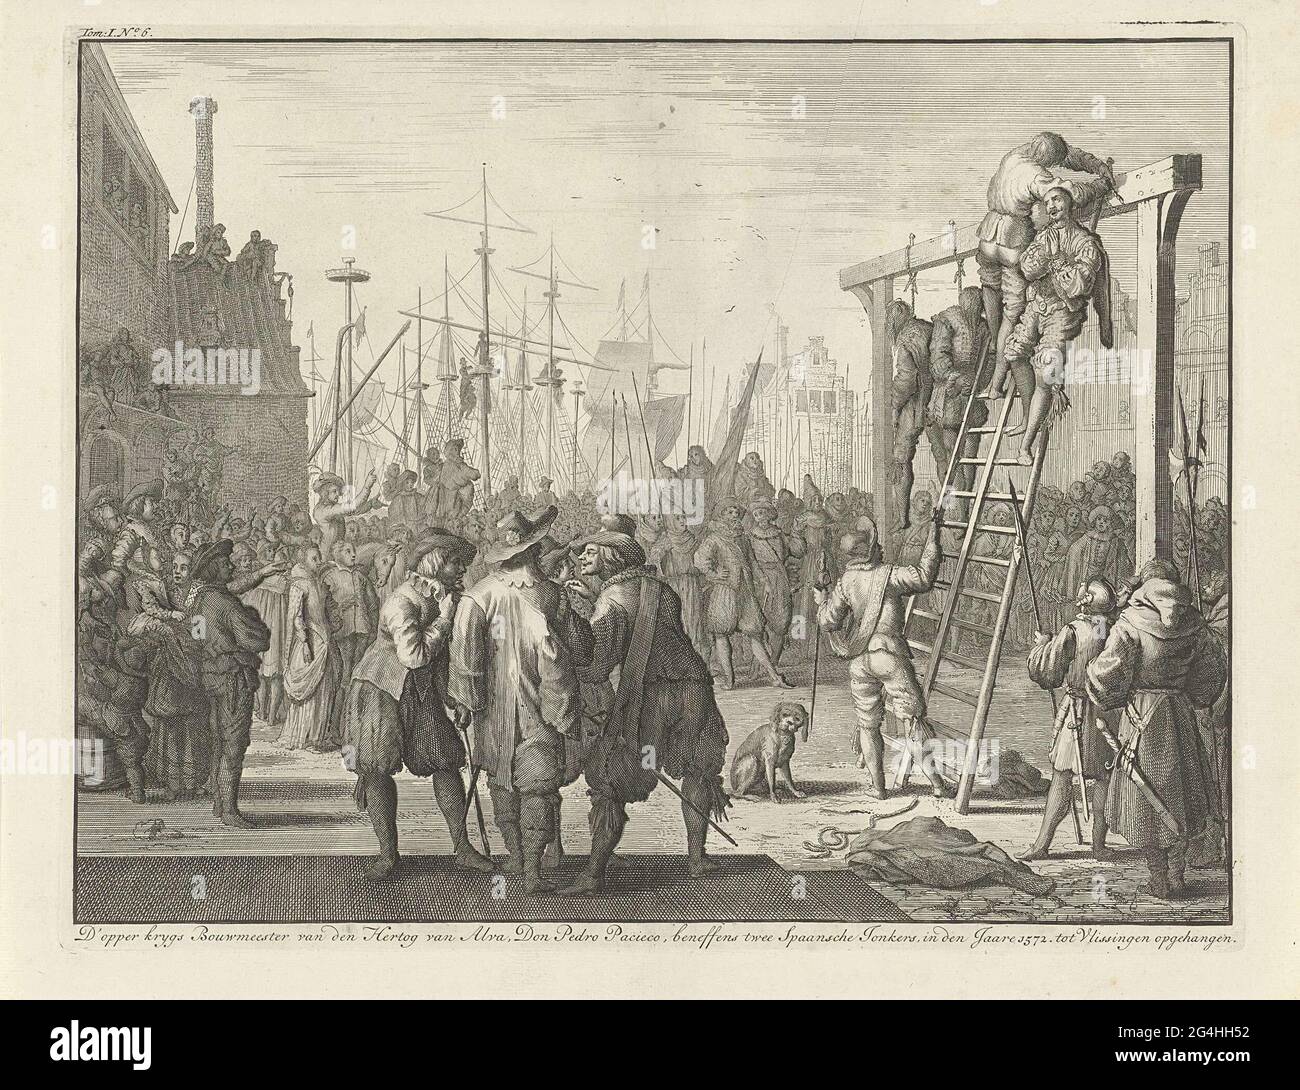 . Don Pedro (or Fernando) Pacieco, Martial Building master (Engineer) of the Duke of Alva is hung with two other Spaniards in Vlissingen, April 8, 1572. With many spectators, in the background the masts of the ships on the quay. Print at the top left Signed: Tom: I. No. 6. Stock Photo